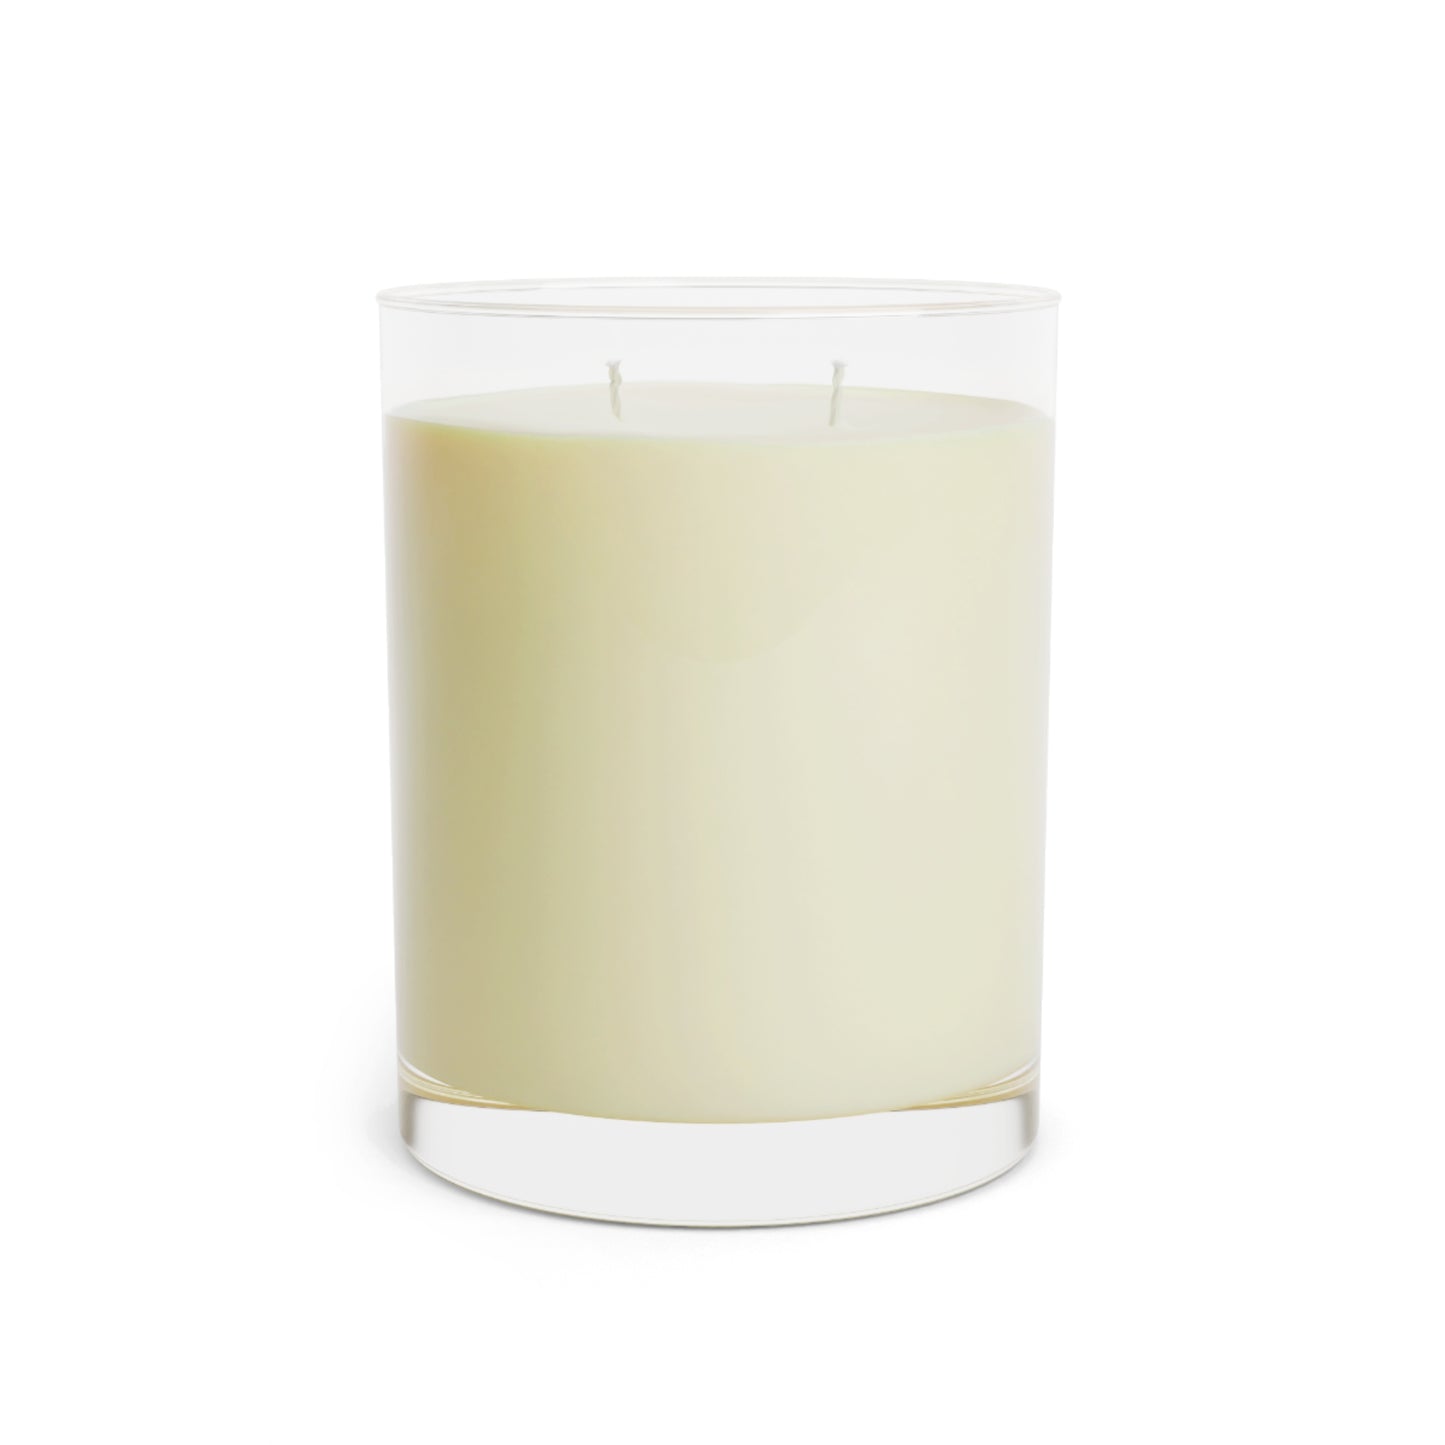 "Motivational" Scented Candle - Full Glass, 11oz